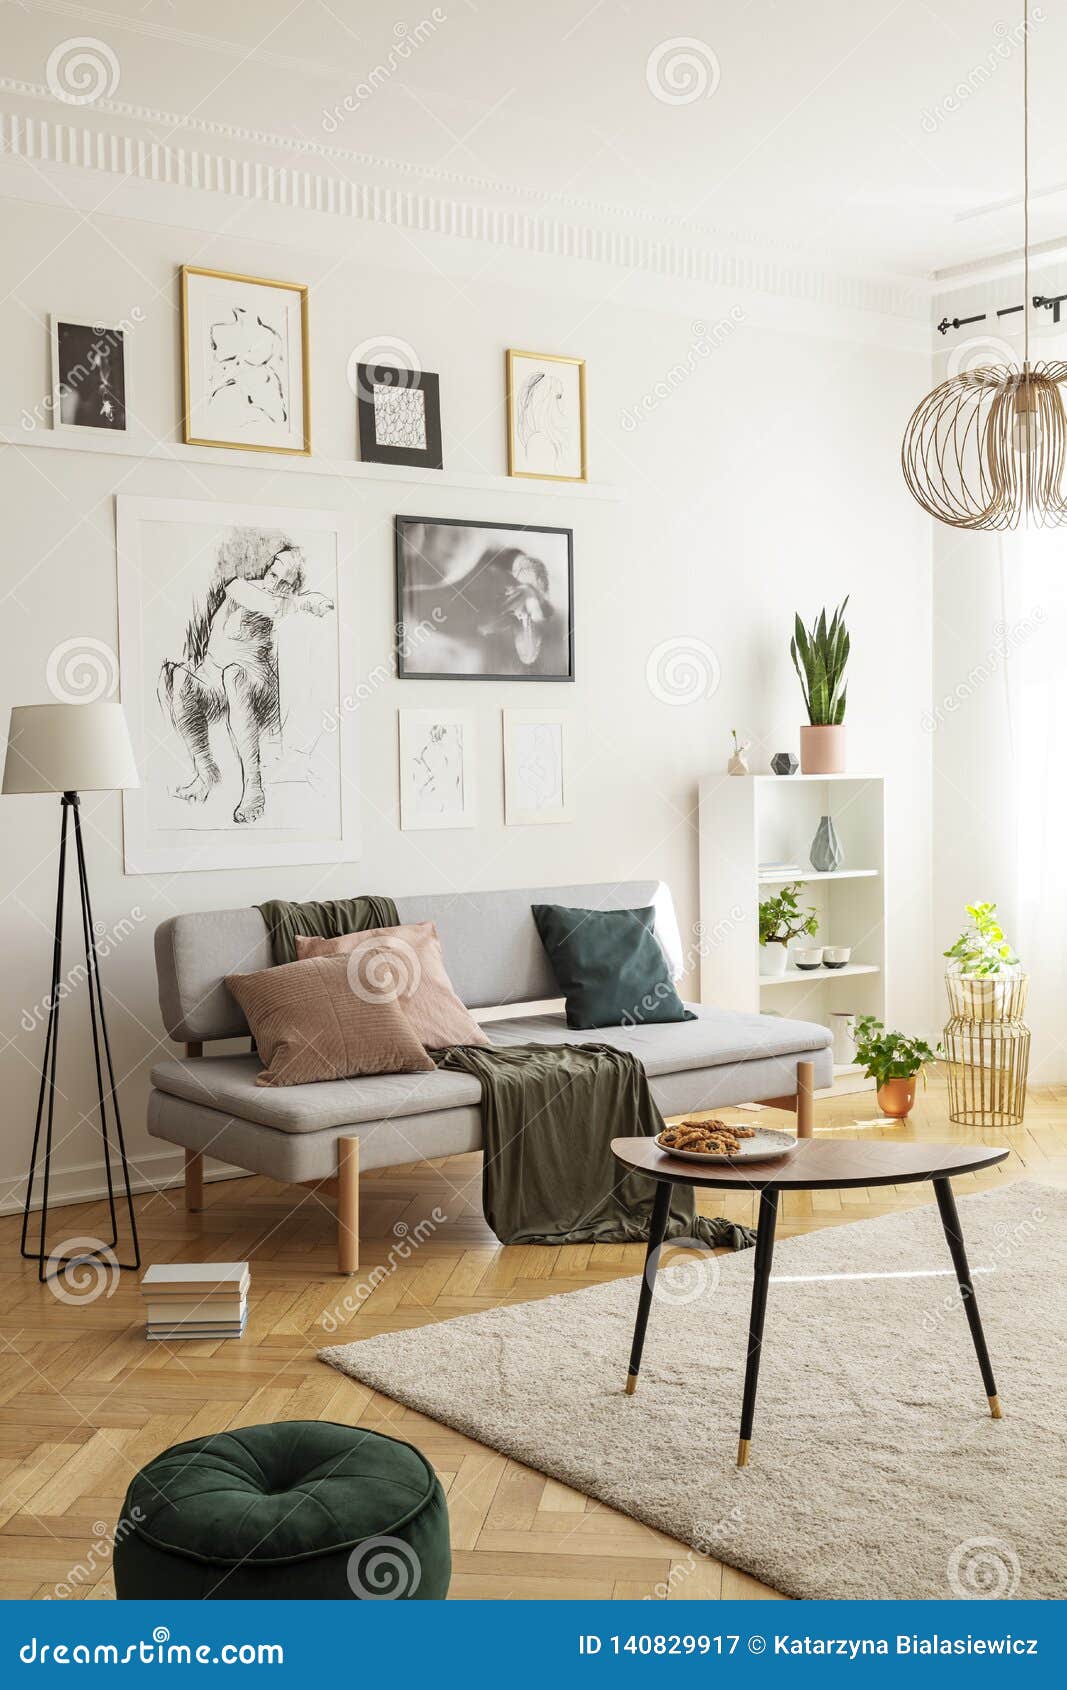 Posters Above Settee With Pillows In Bright Living Room 